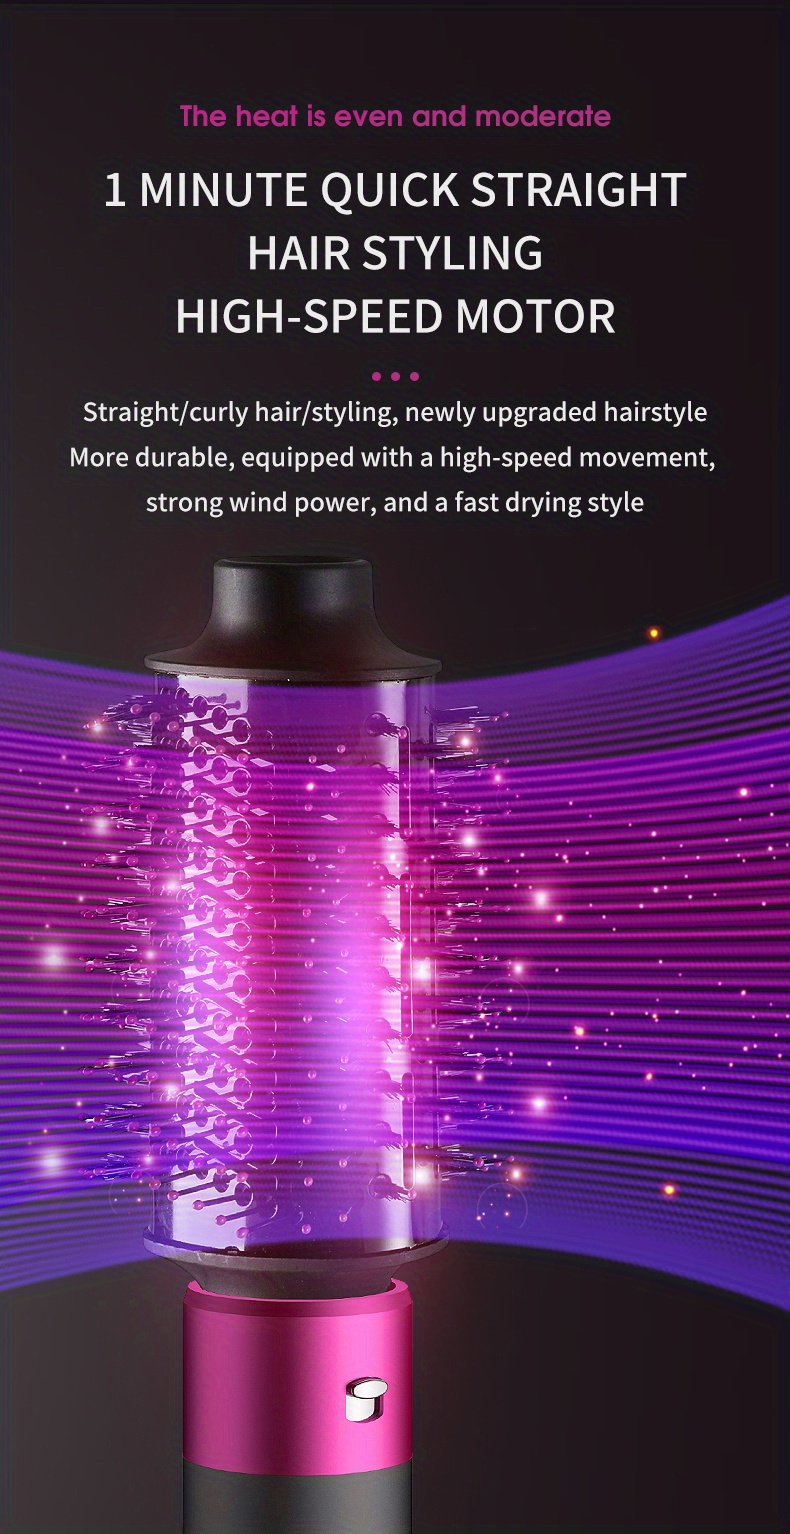 negative ion straight hair comb artifact does not hurt hair dual use straight curling iron multifunctional detachable comb head hair styling hair dryer comb details 4